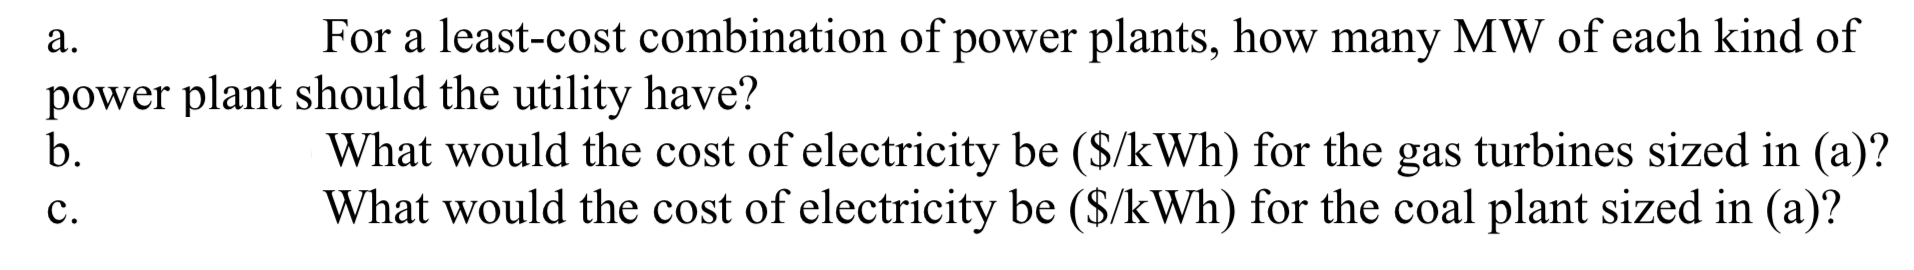 а.
For a least-cost combination of power plants, how many MW of each kind of
power plant should the utility have?
b.
What would the cost of electricity be ($/kWh) for the gas turbines sized in (a)?
What would the cost of electricity be ($/kWh) for the coal plant sized in (a)?
с.
